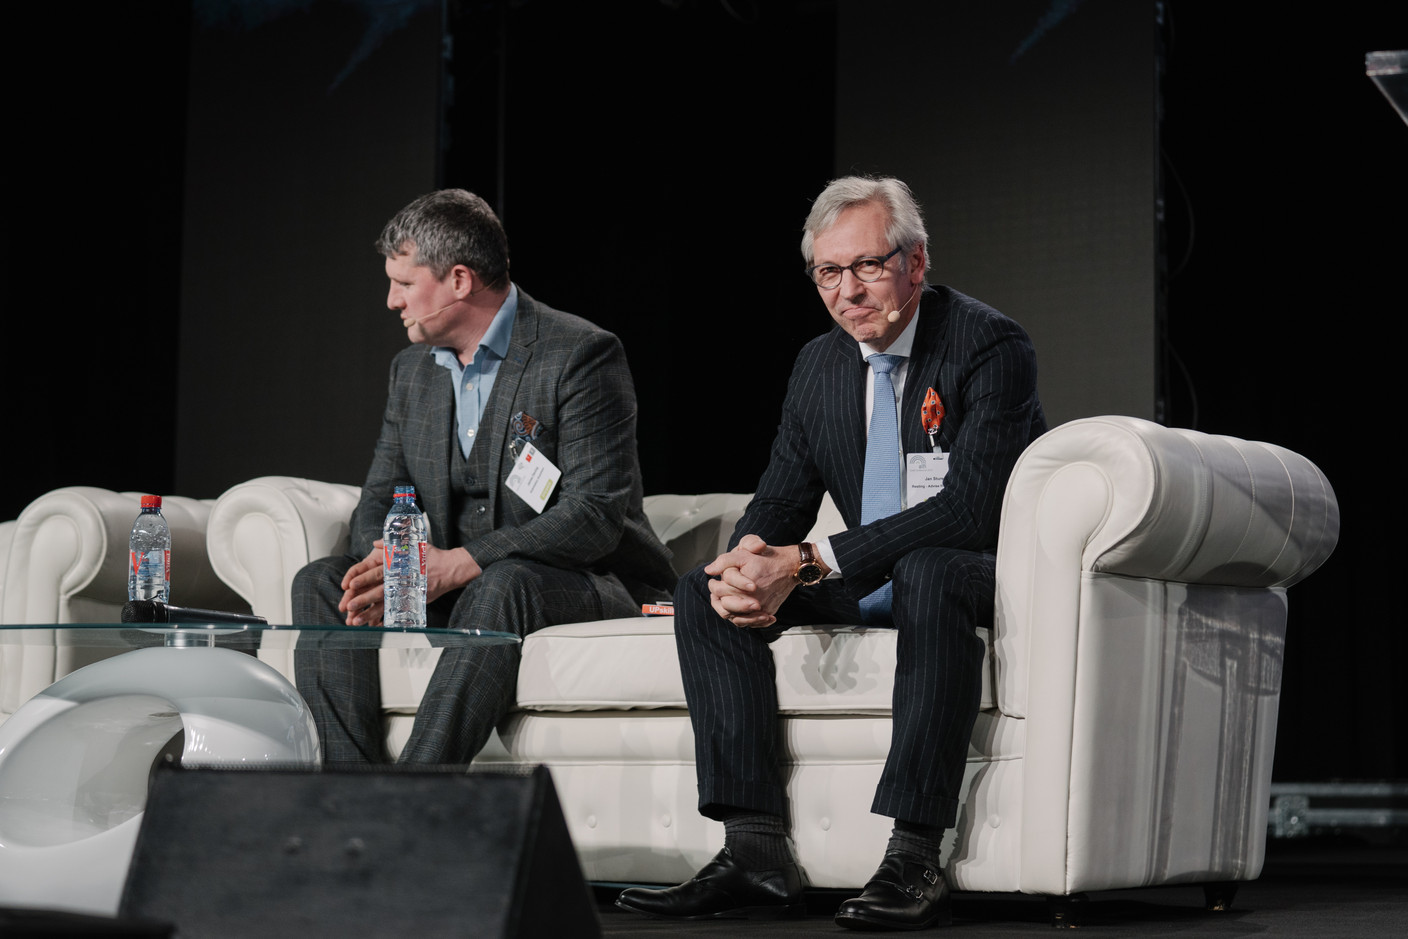 James Dening (Automation Anywhere) et Jan Sturesson (Resting - Advise from the future) (Photo: Marion Dessard)